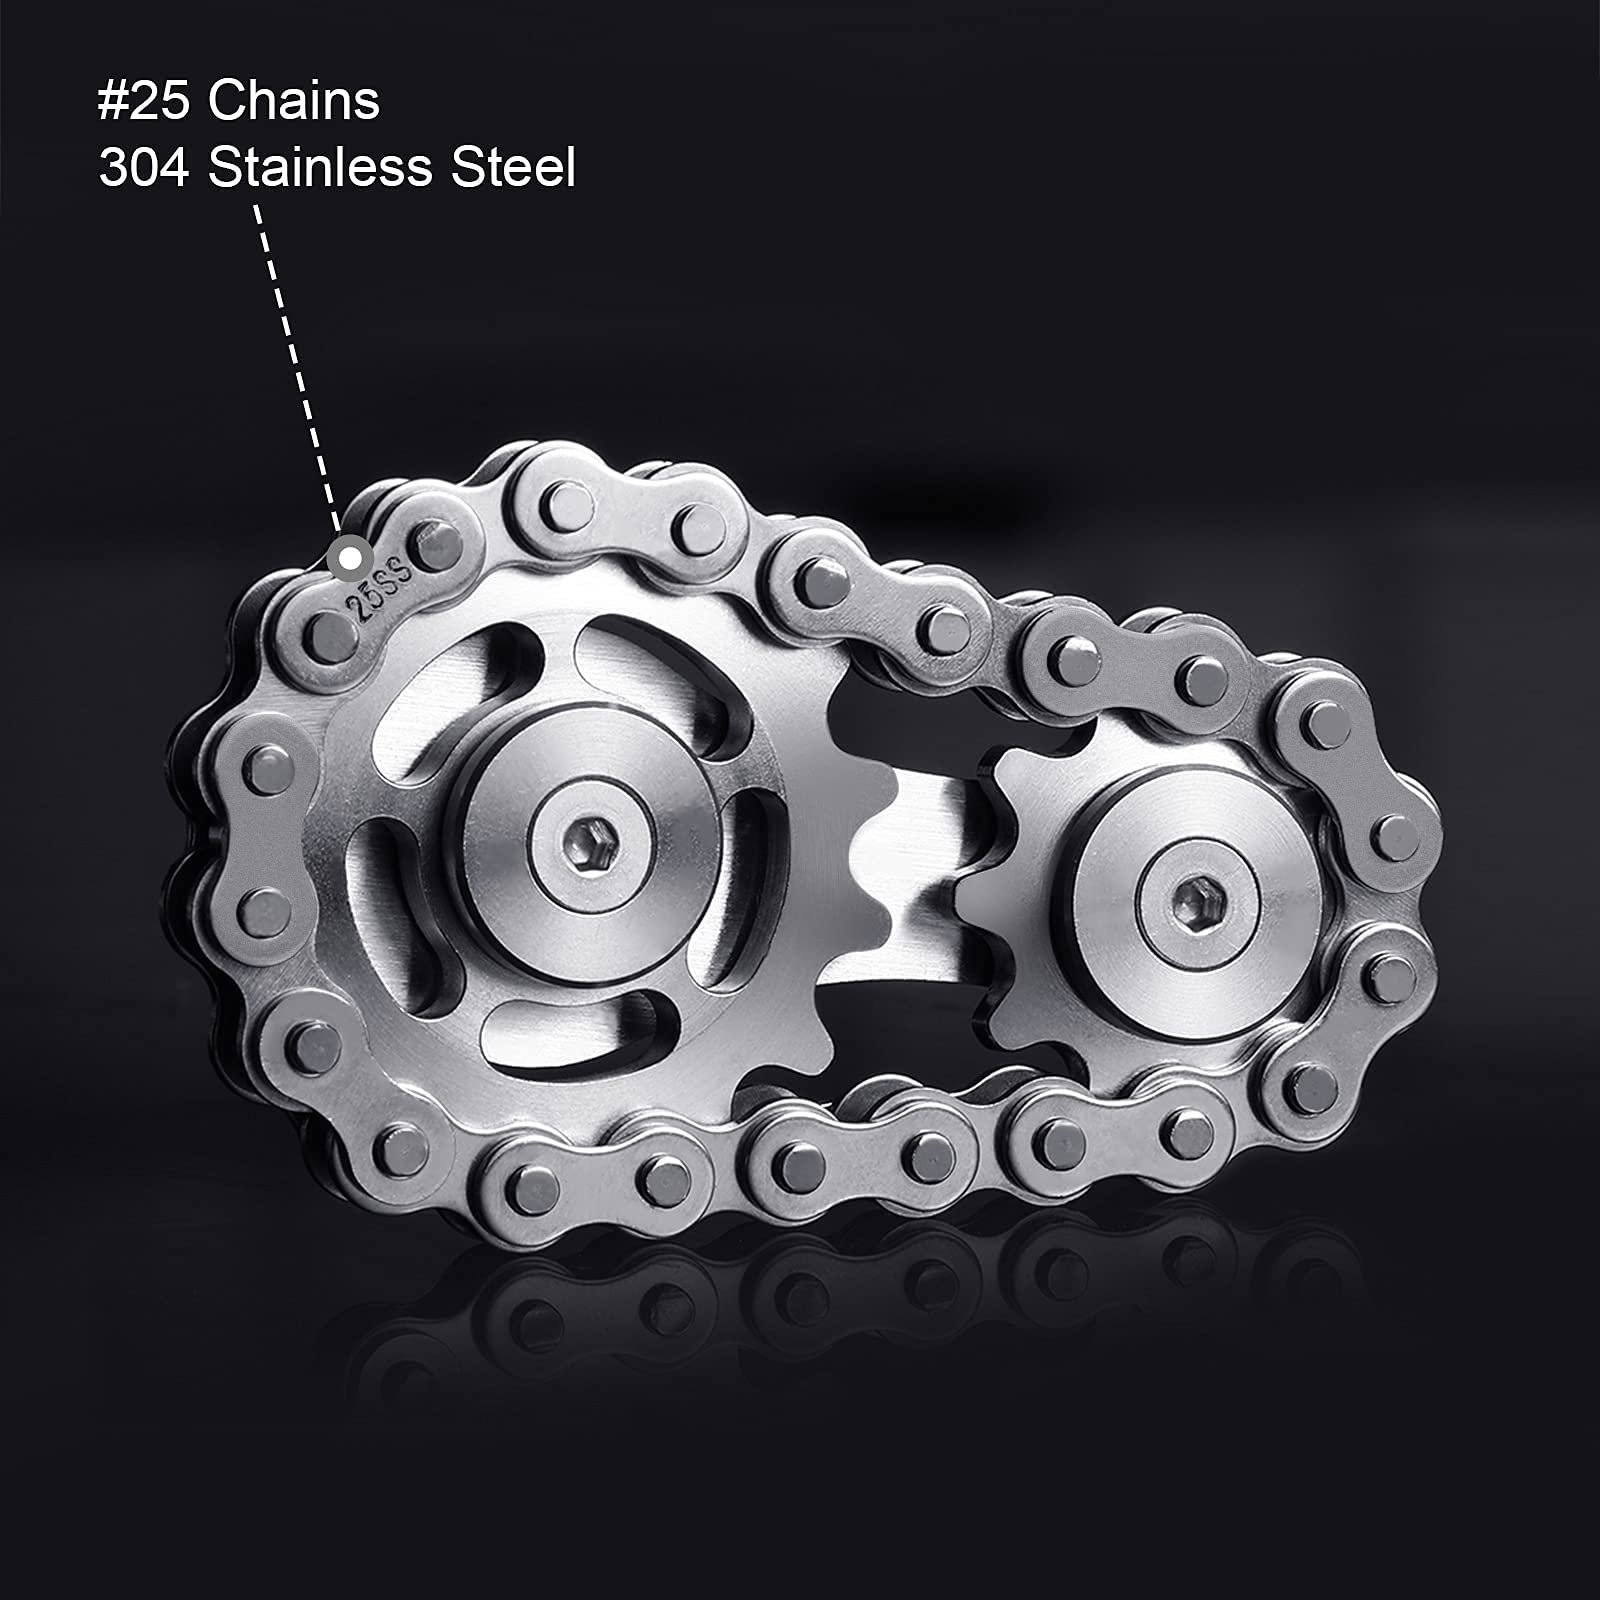 🔥Last Day 50% OFF🔥Sprockets Bicycle Chain Fidget Spinner Toys